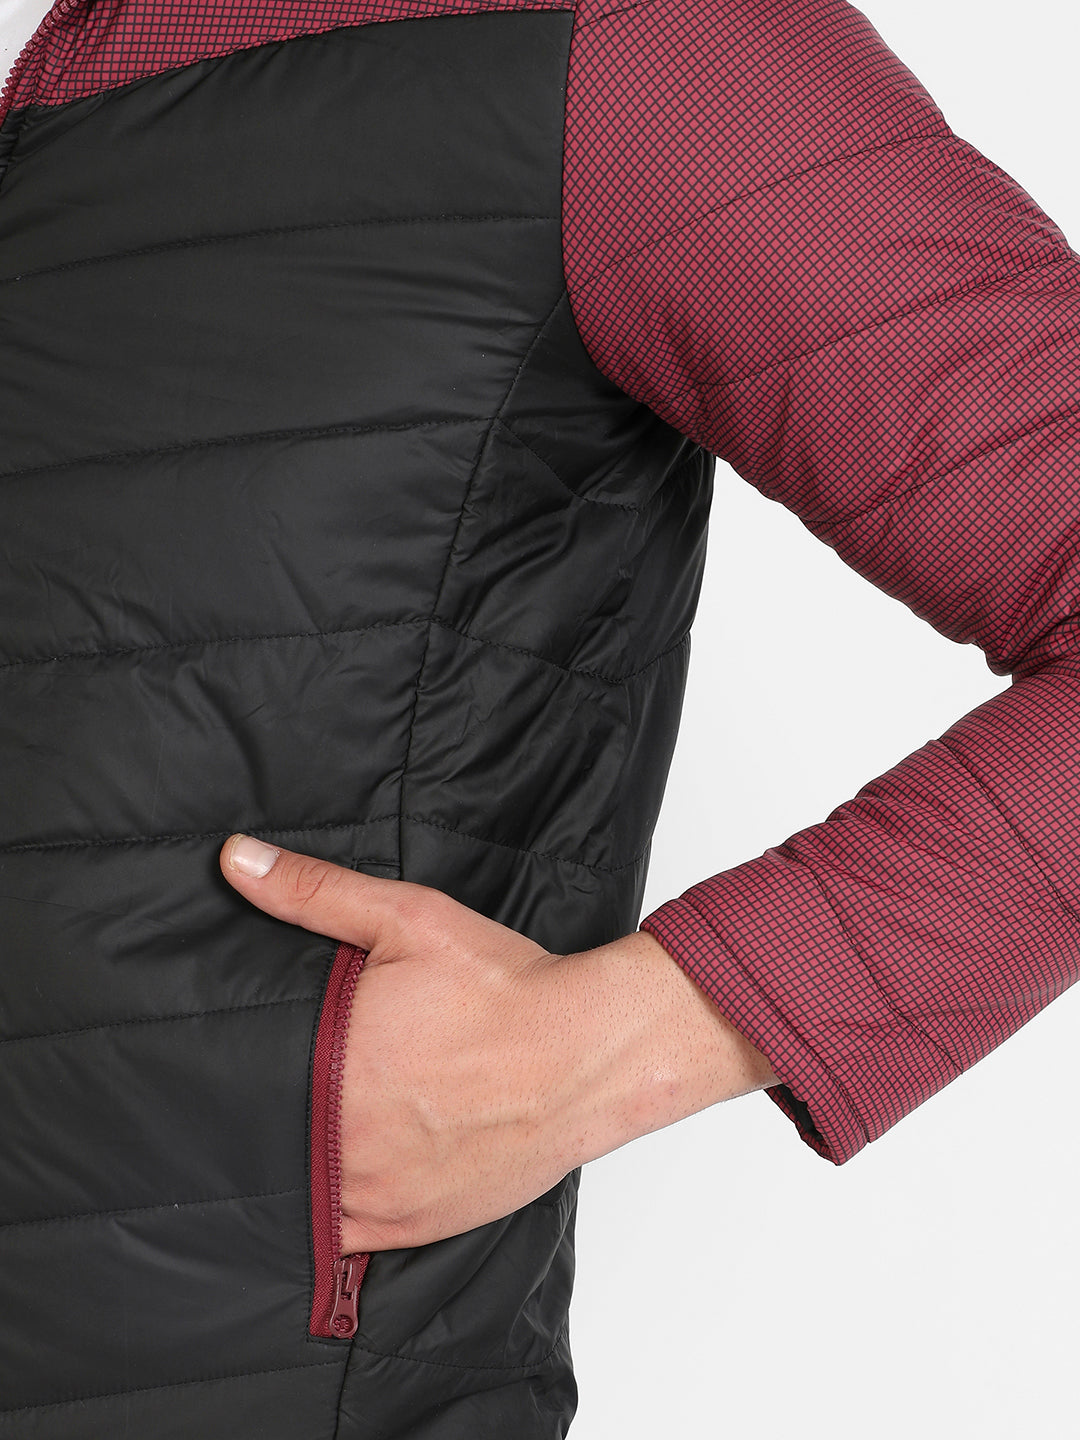 Men's Black & Maroon Micro-Checkered Quilted Puffer Jacket